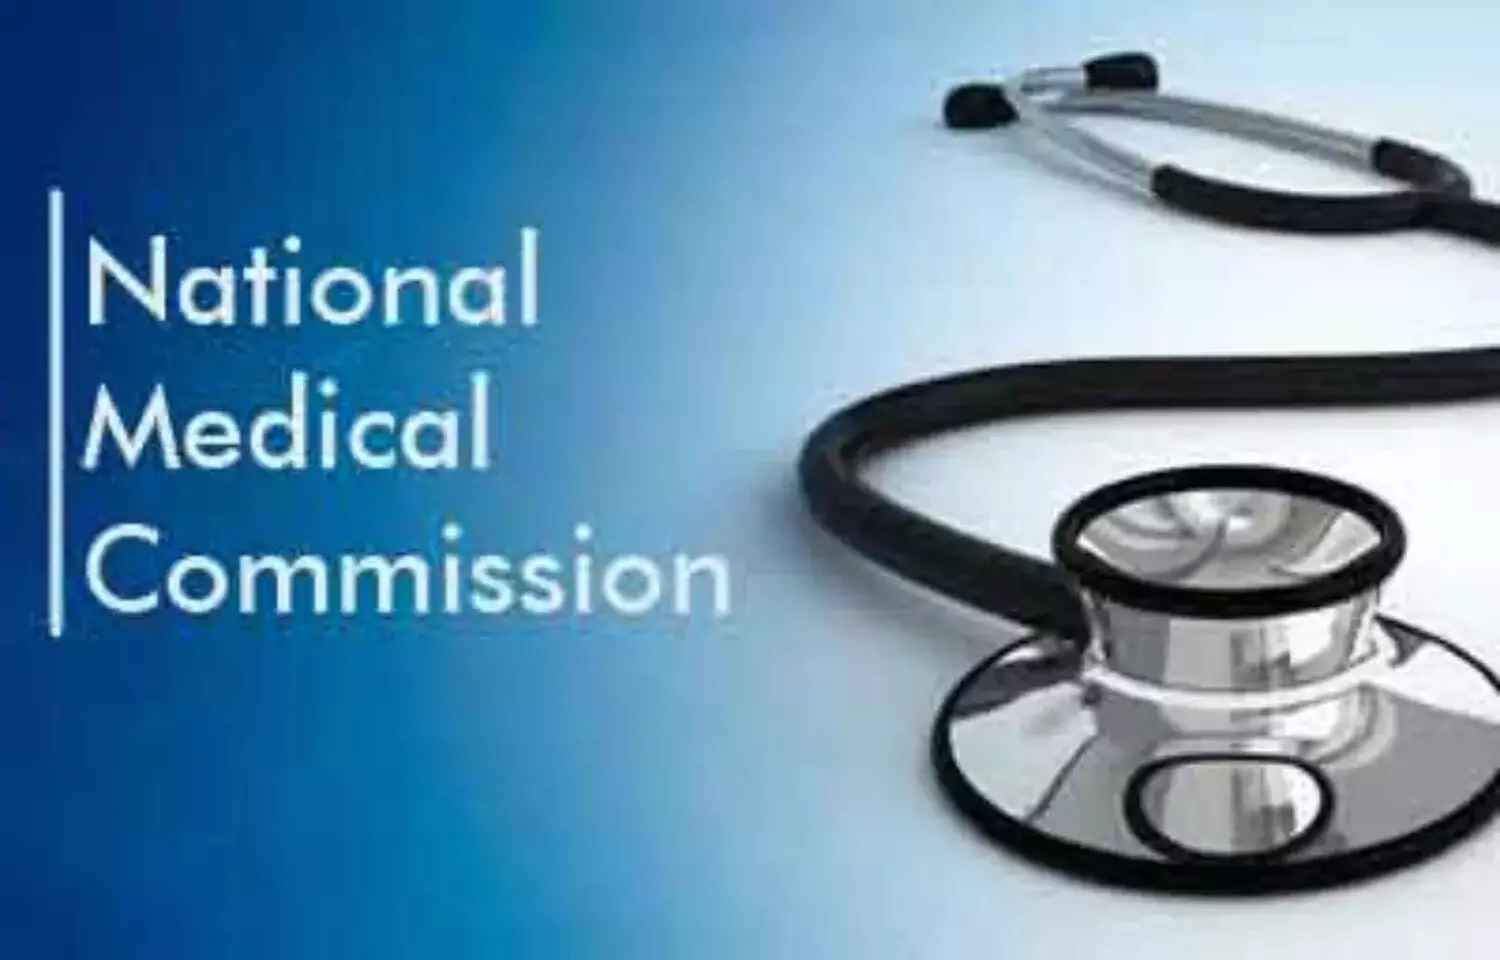 Only 2 years for FMGs to clear Screening tests in India after MBBS abroad: NMC releases new draft regulation